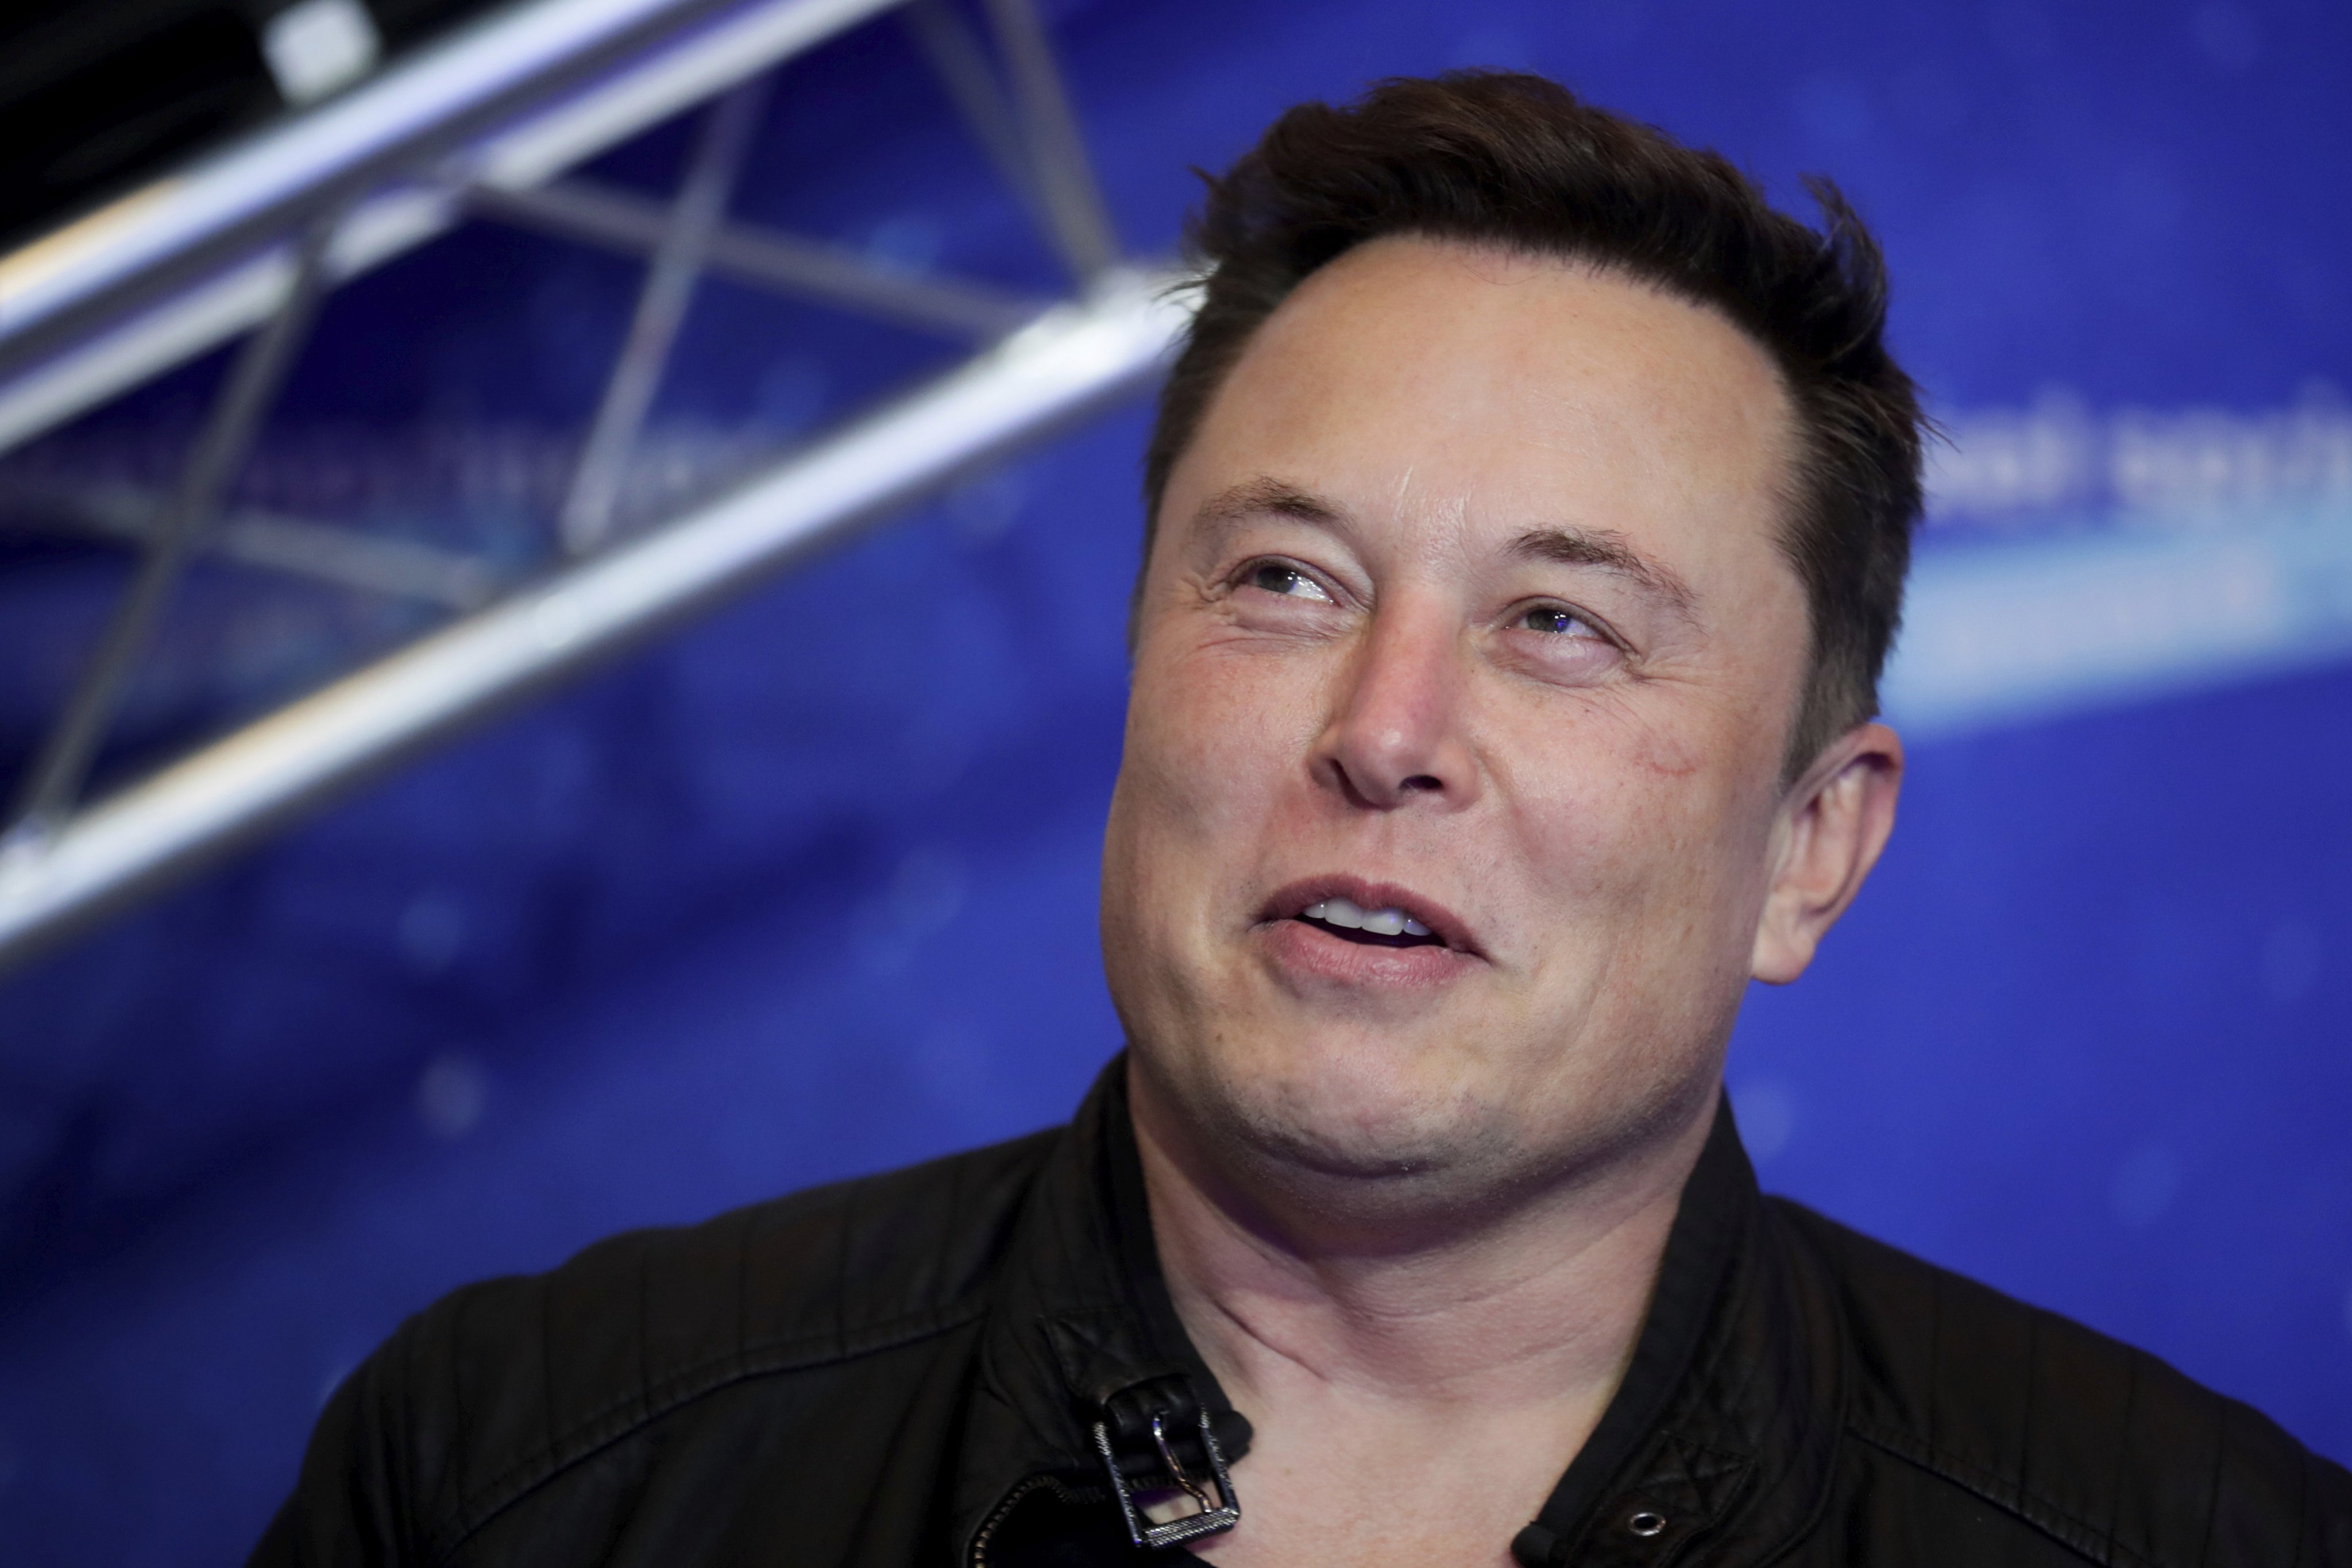 SpaceX owner and Tesla CEO Elon Musk’s wealth increased by more than any other billionaire’s in 2021. Photo: Hannibal Hanschke/Pool Photo via AP